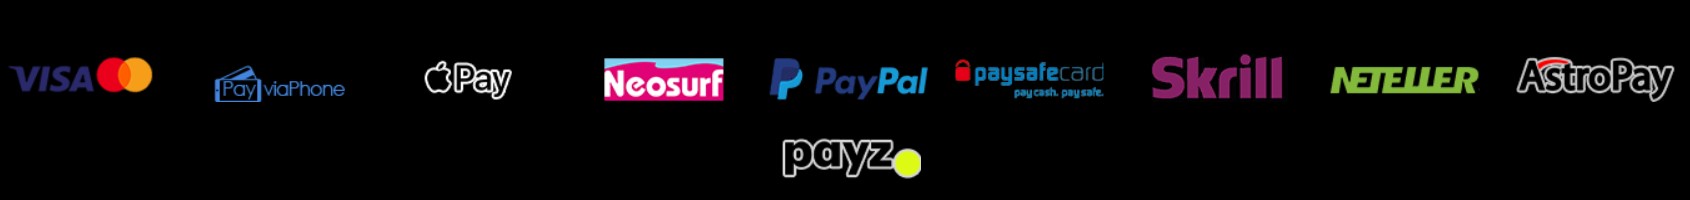 conquer payment methods